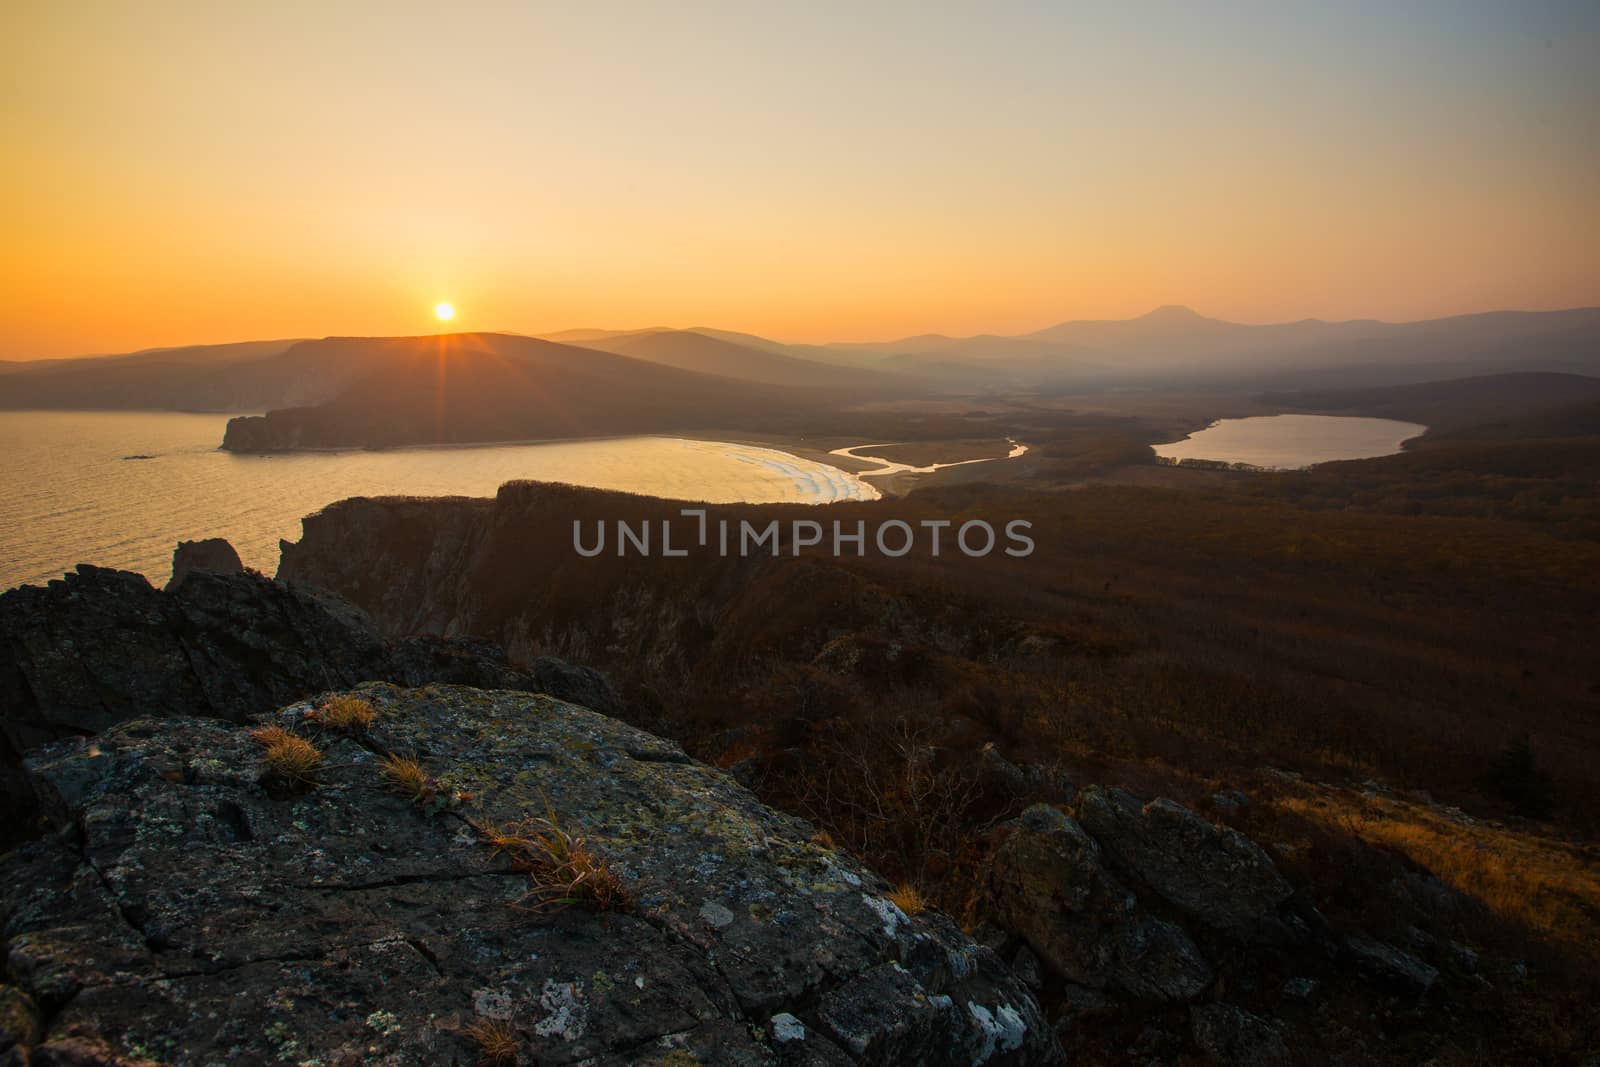 View from above. A beautiful sunset in the Sikhote-Alin Biosphere Reserve in the Primorsky Territory. Golden autumn in the wild